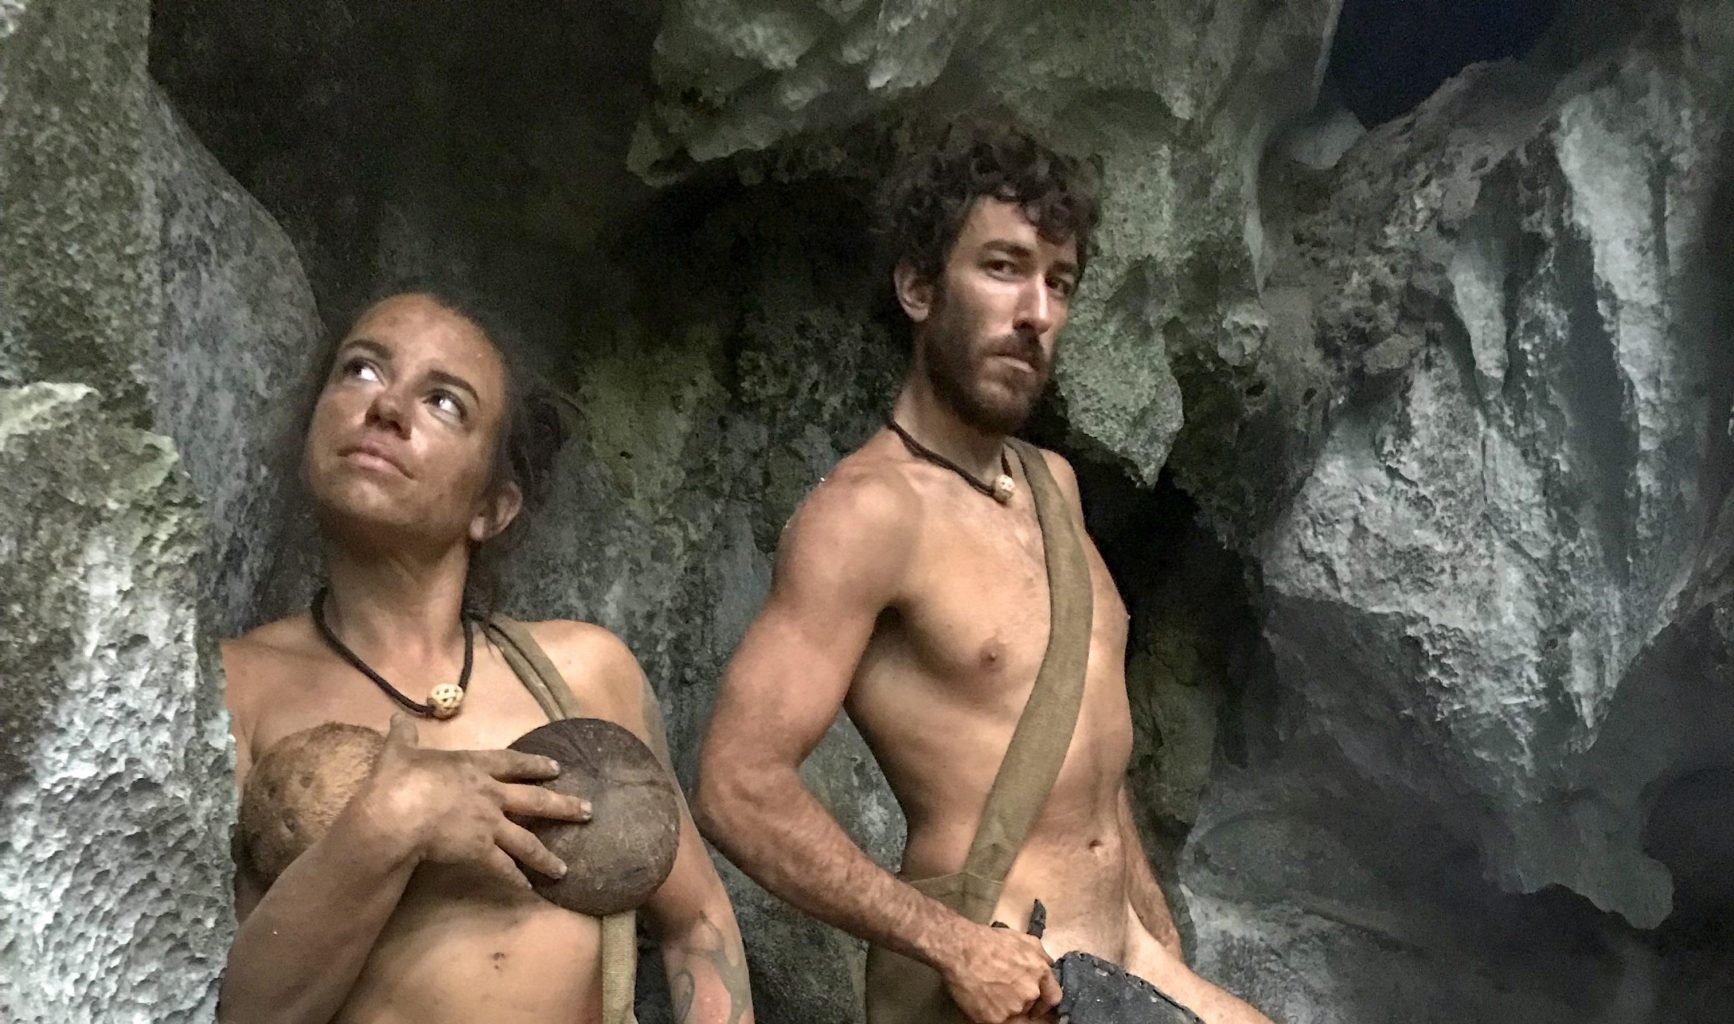 What happened to laura from naked and afraid